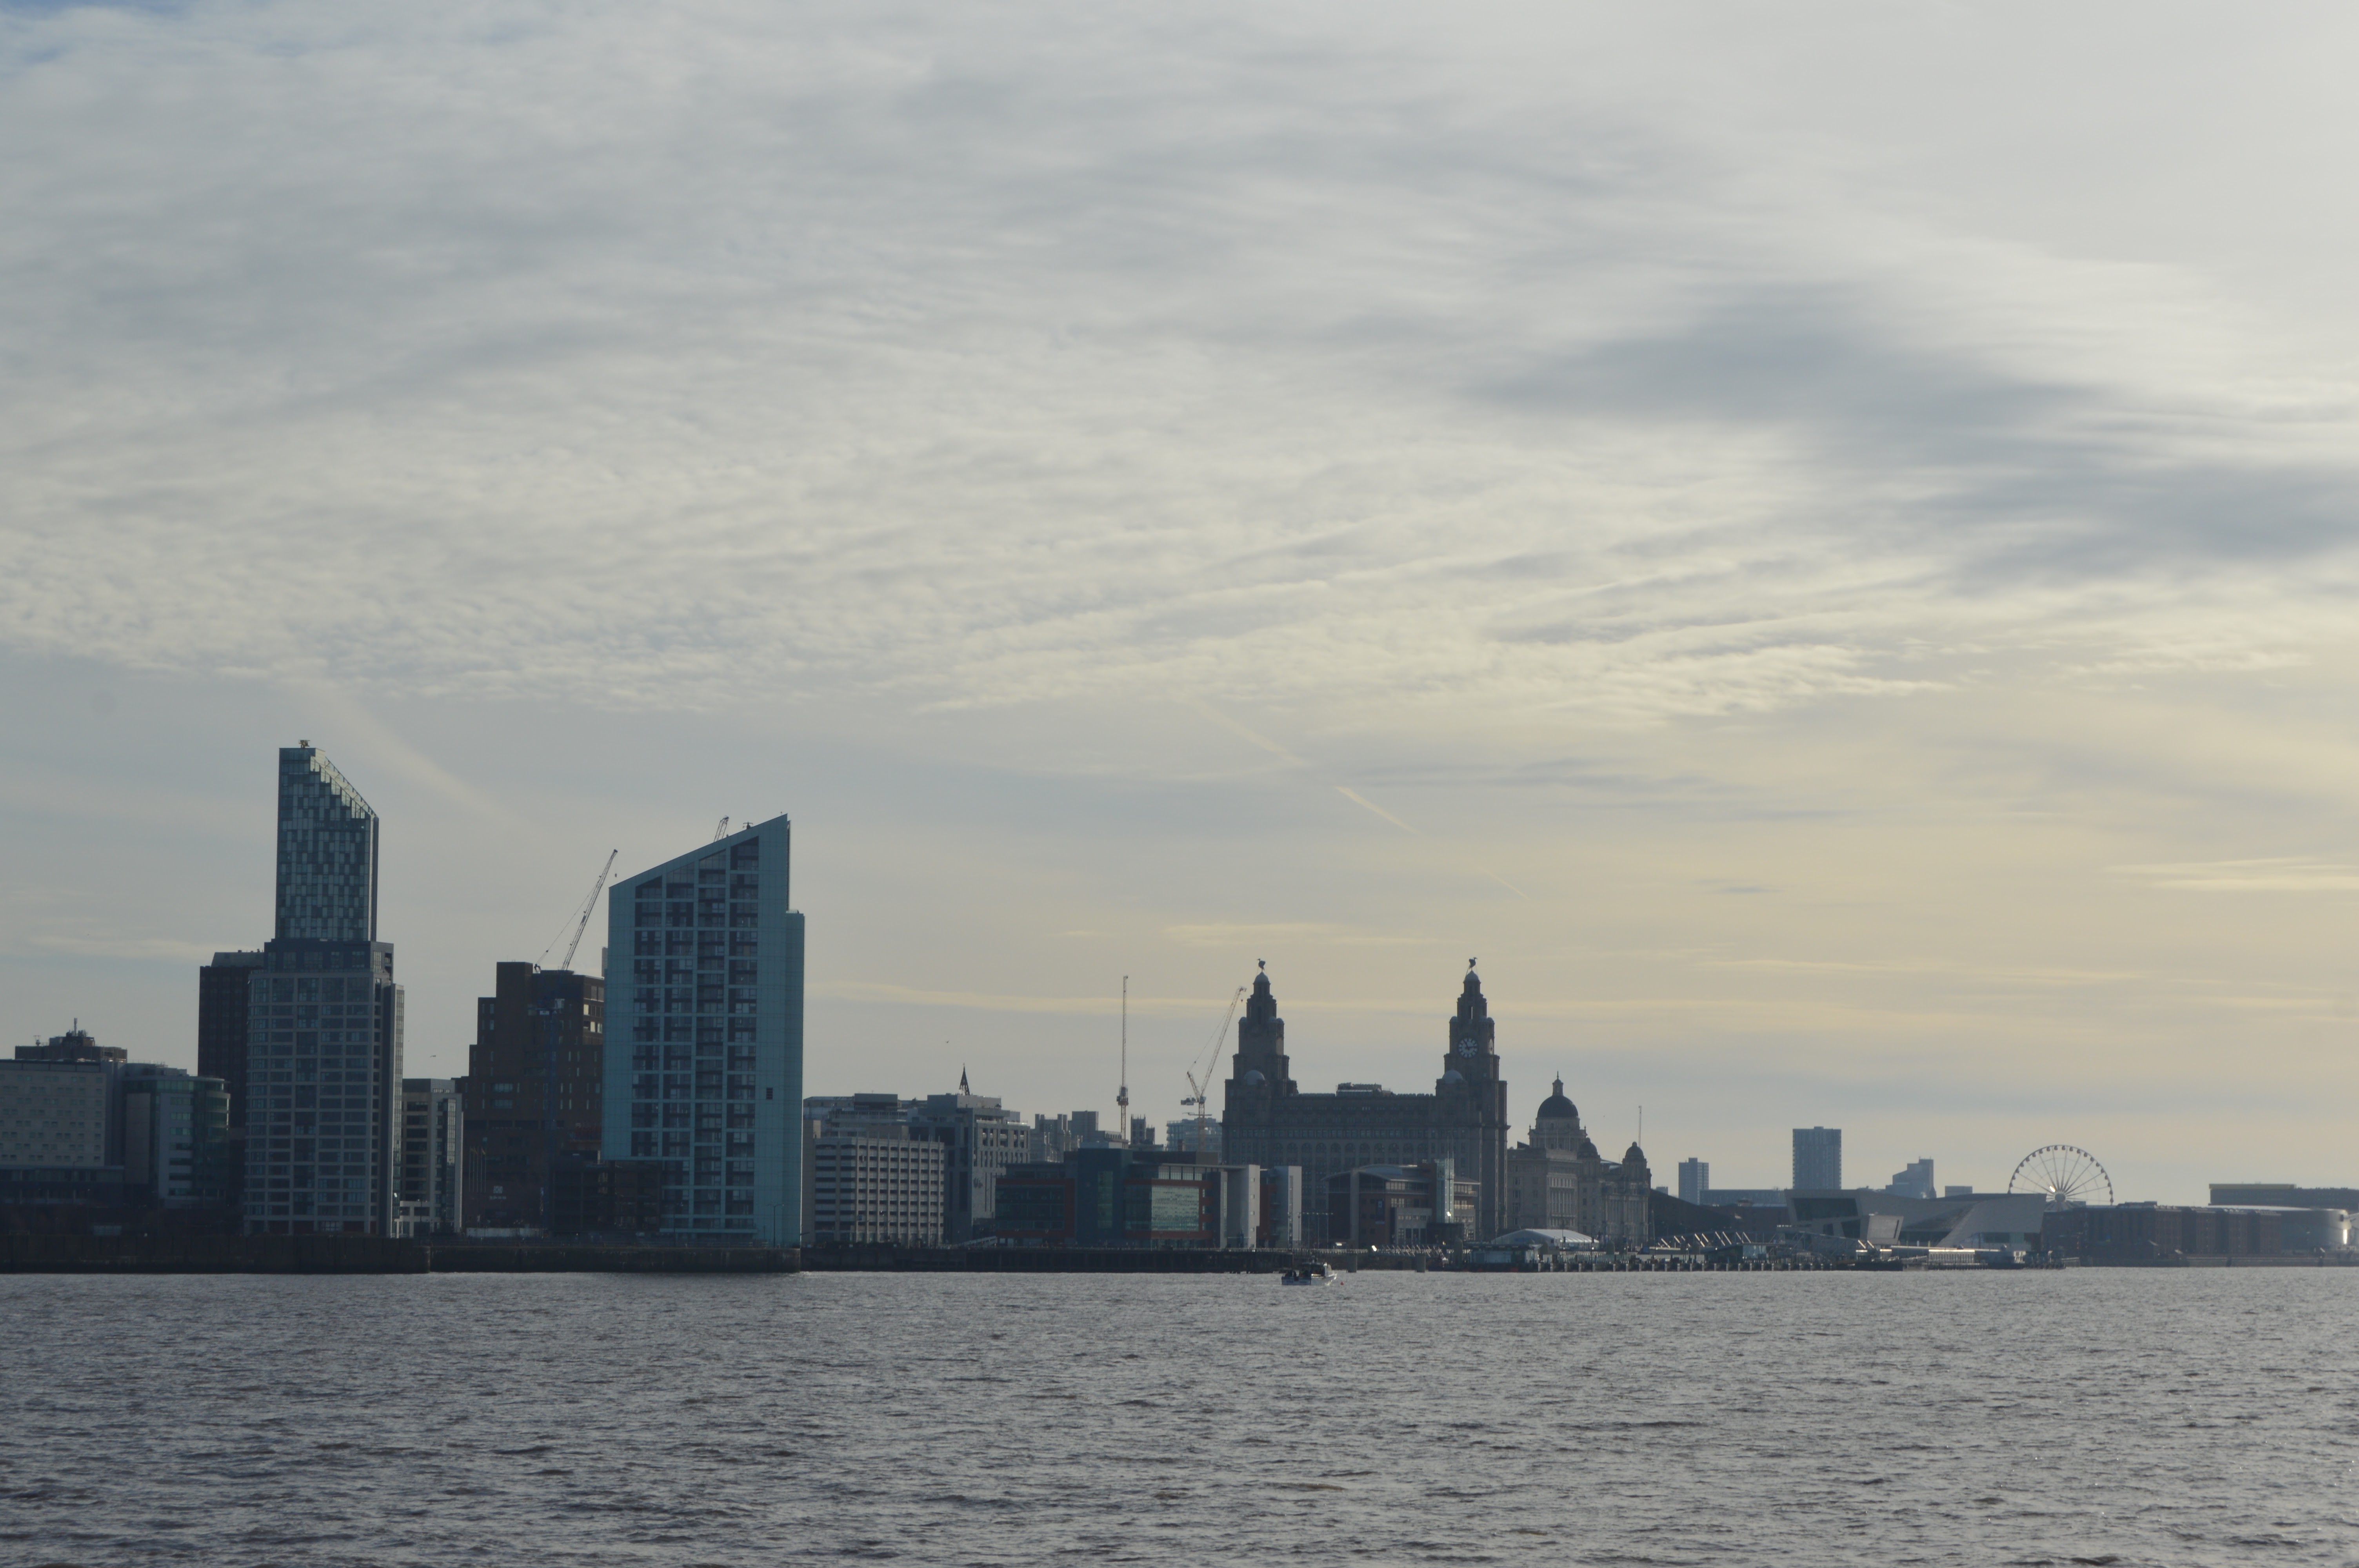 View across the river Mersey